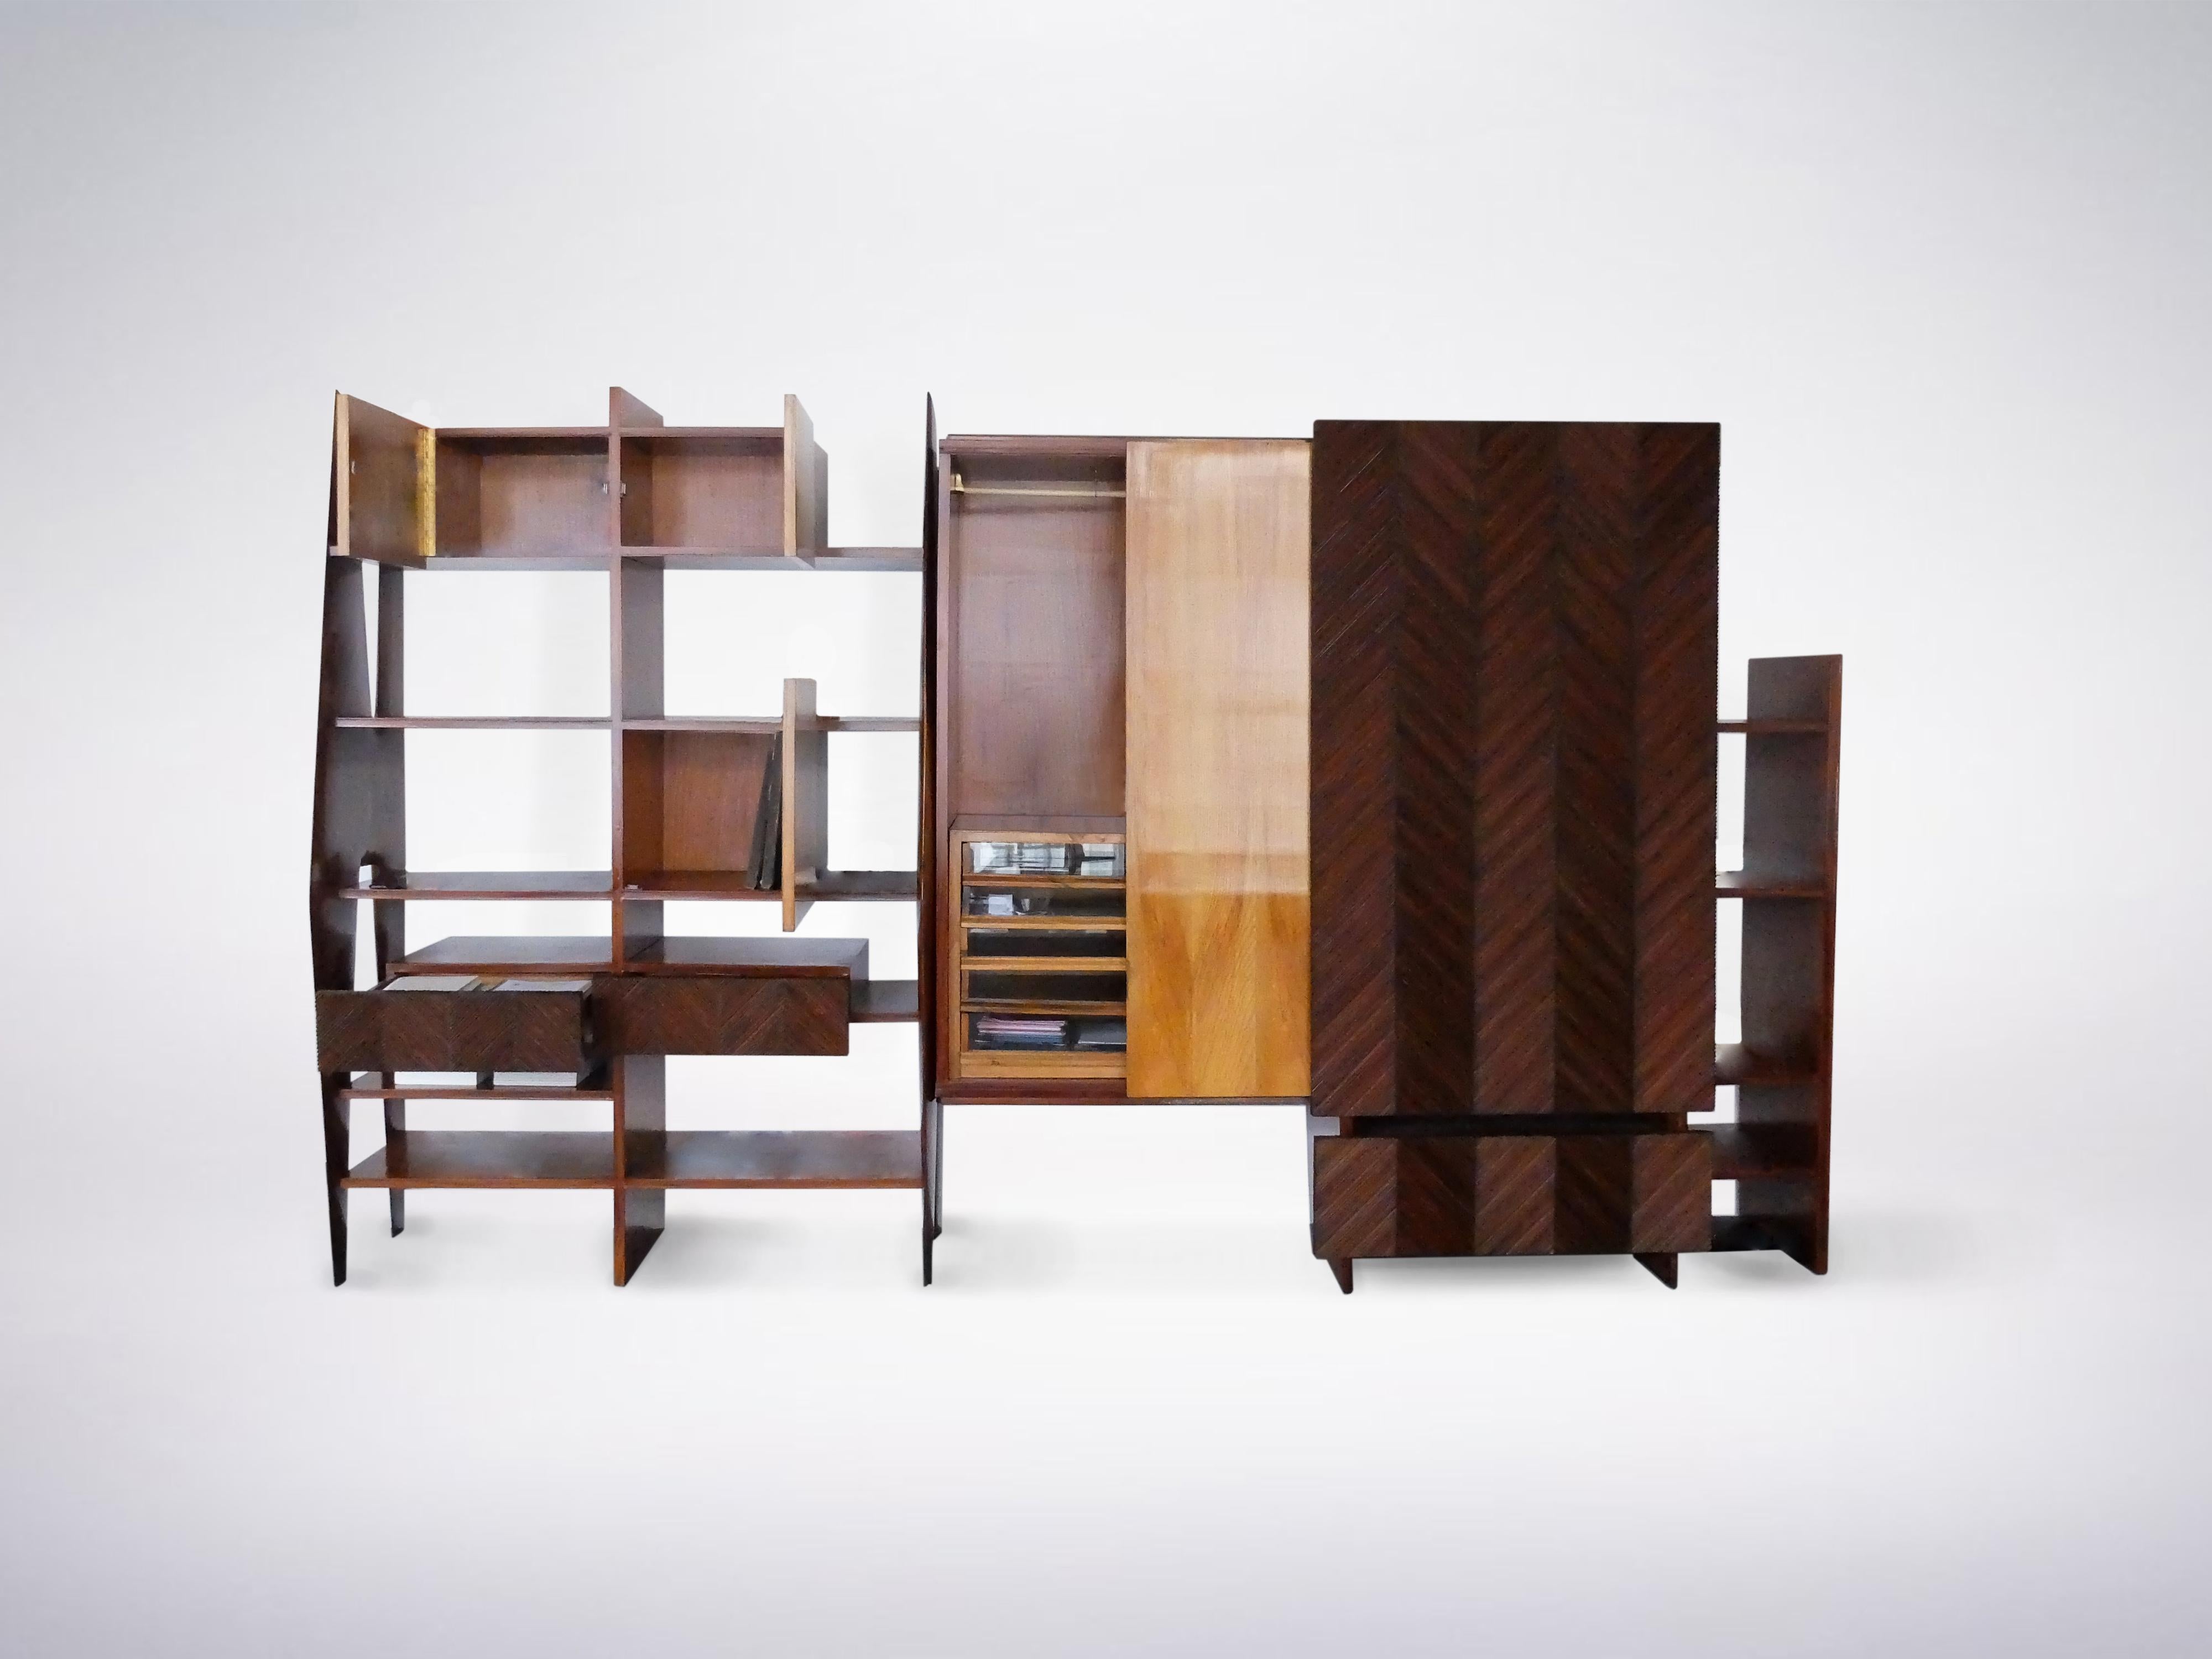 Ico Parisi, Italian Mid-Century Bookshelf in Rosewood and Ashwood, circa 1950

Ico Parisi was an Italian architect and designer. Born Domenico Parisi in 1916 in Palermo, Italy, he was involved in building construction and architecture in Como during